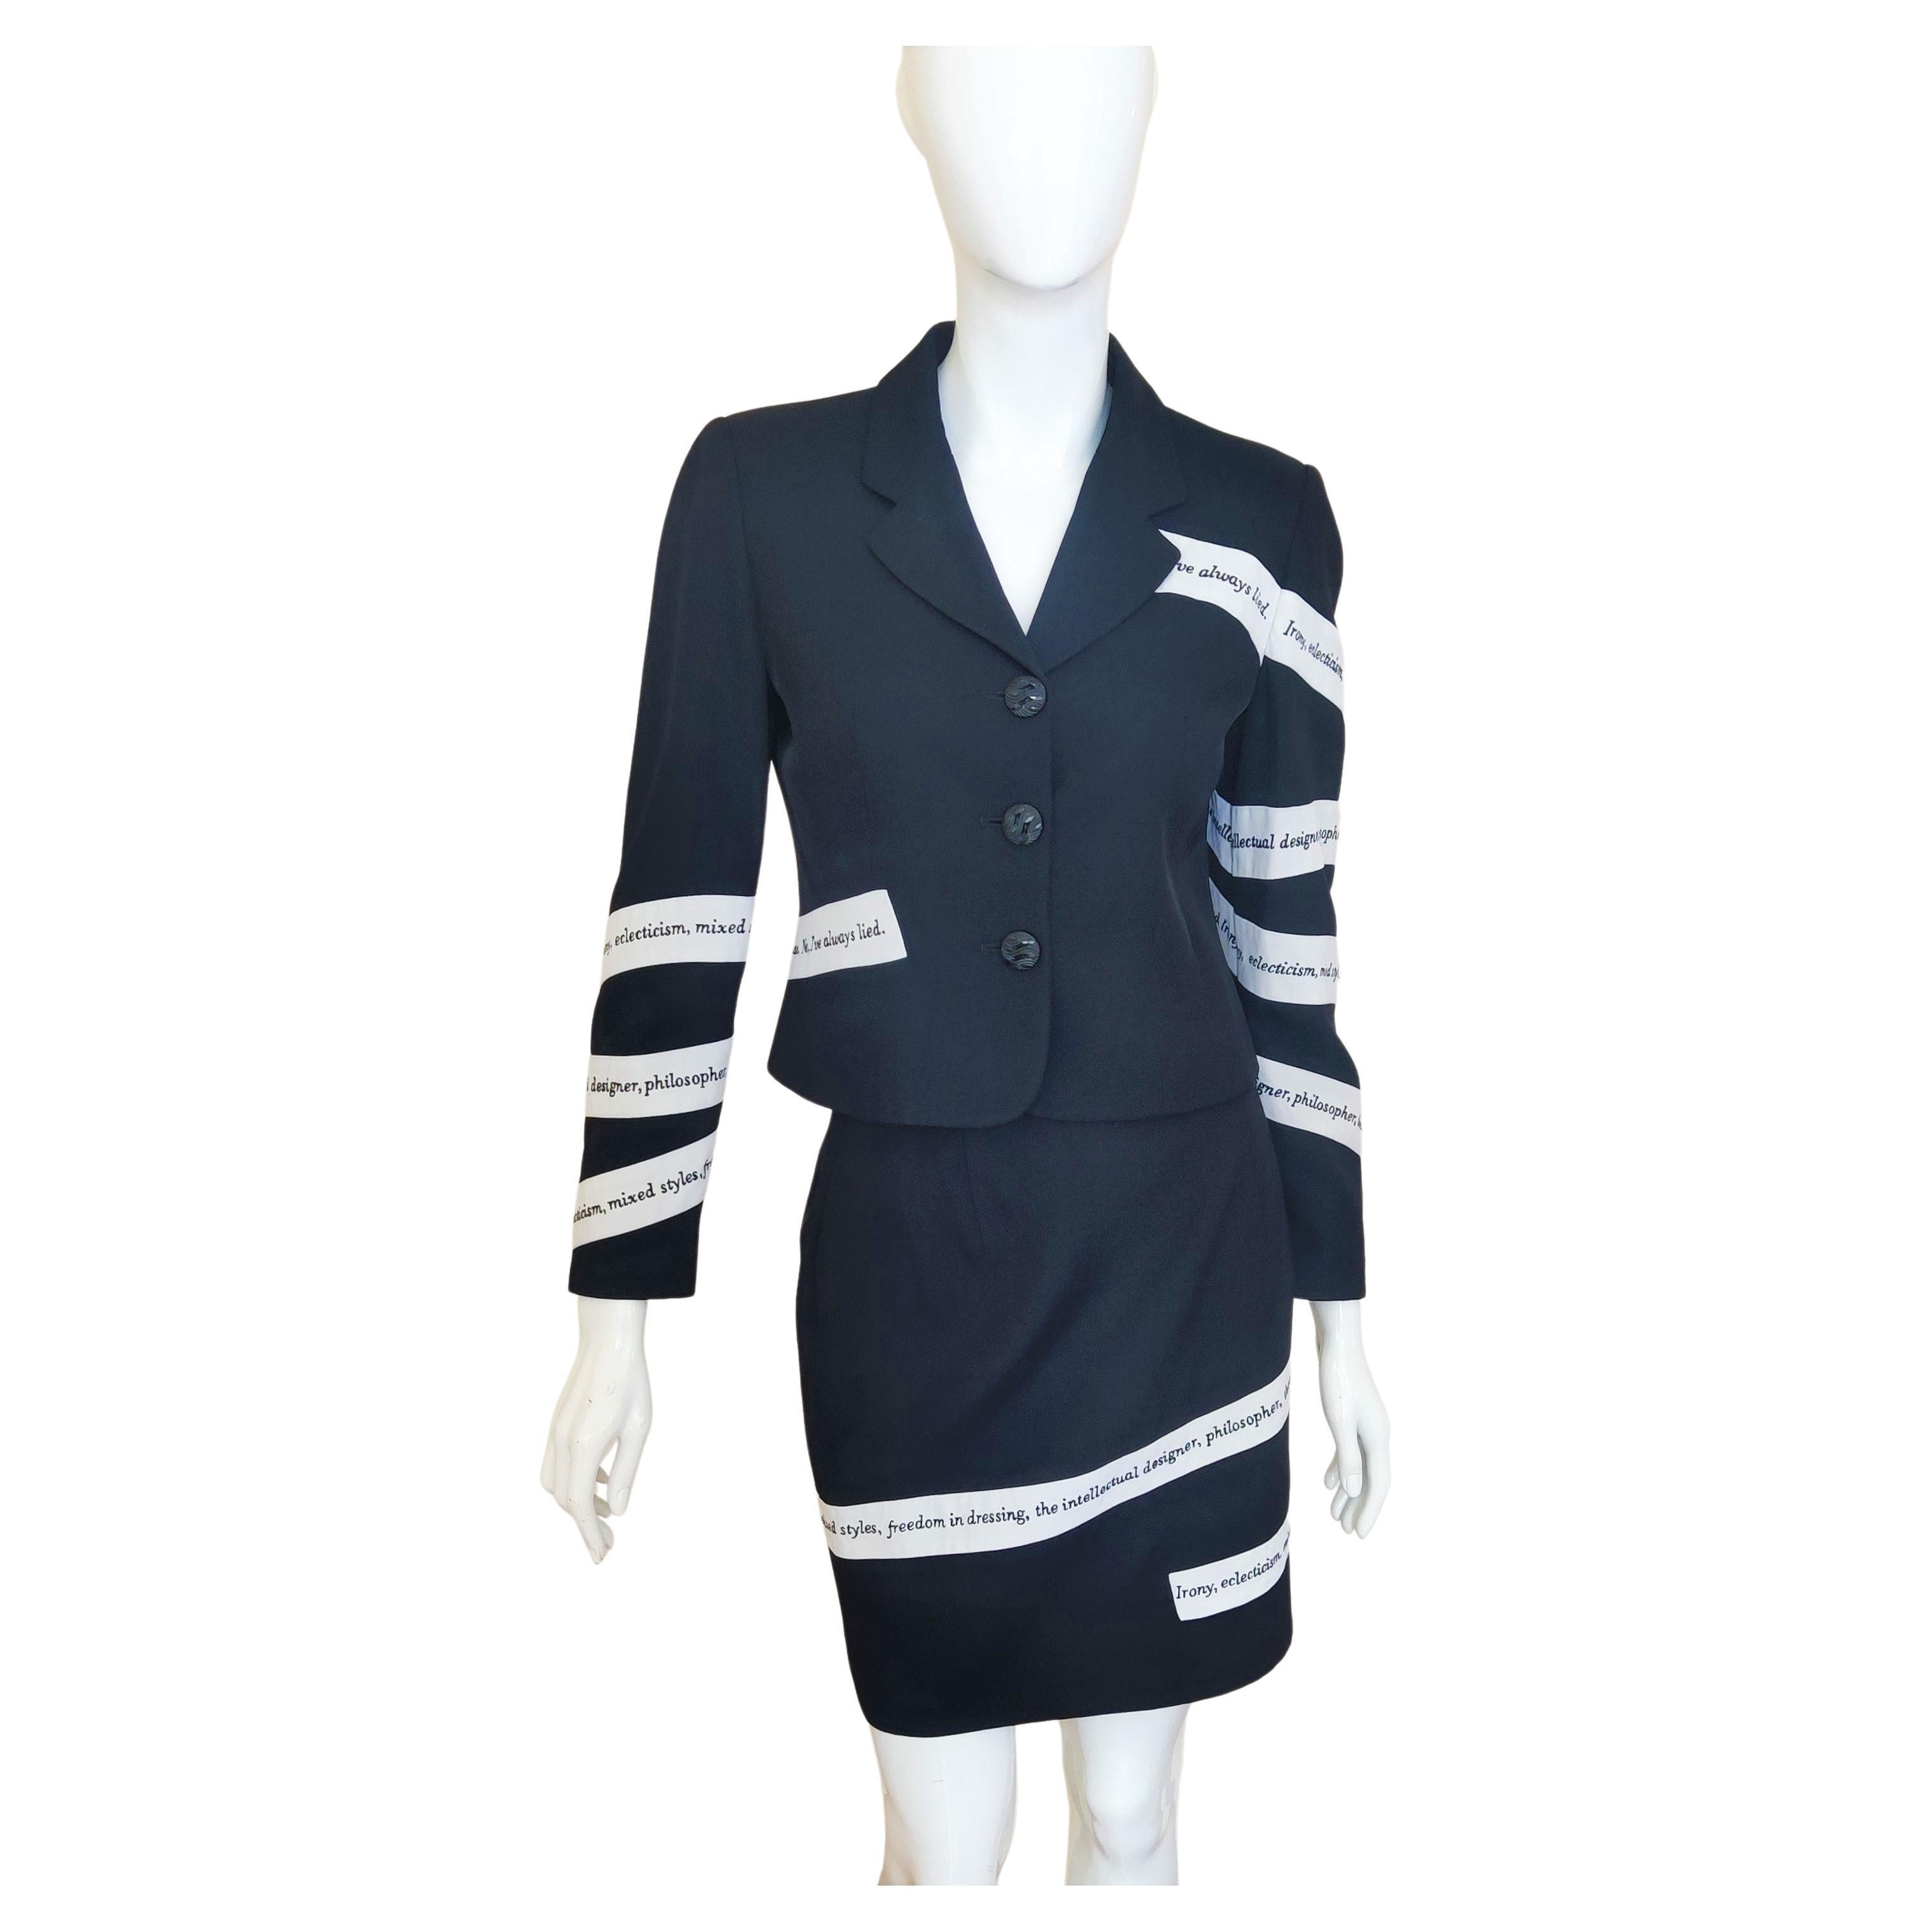 Moschino Cheap and Chic Ironies Text Tape Vintage Couture Black White Dress Suit en vente